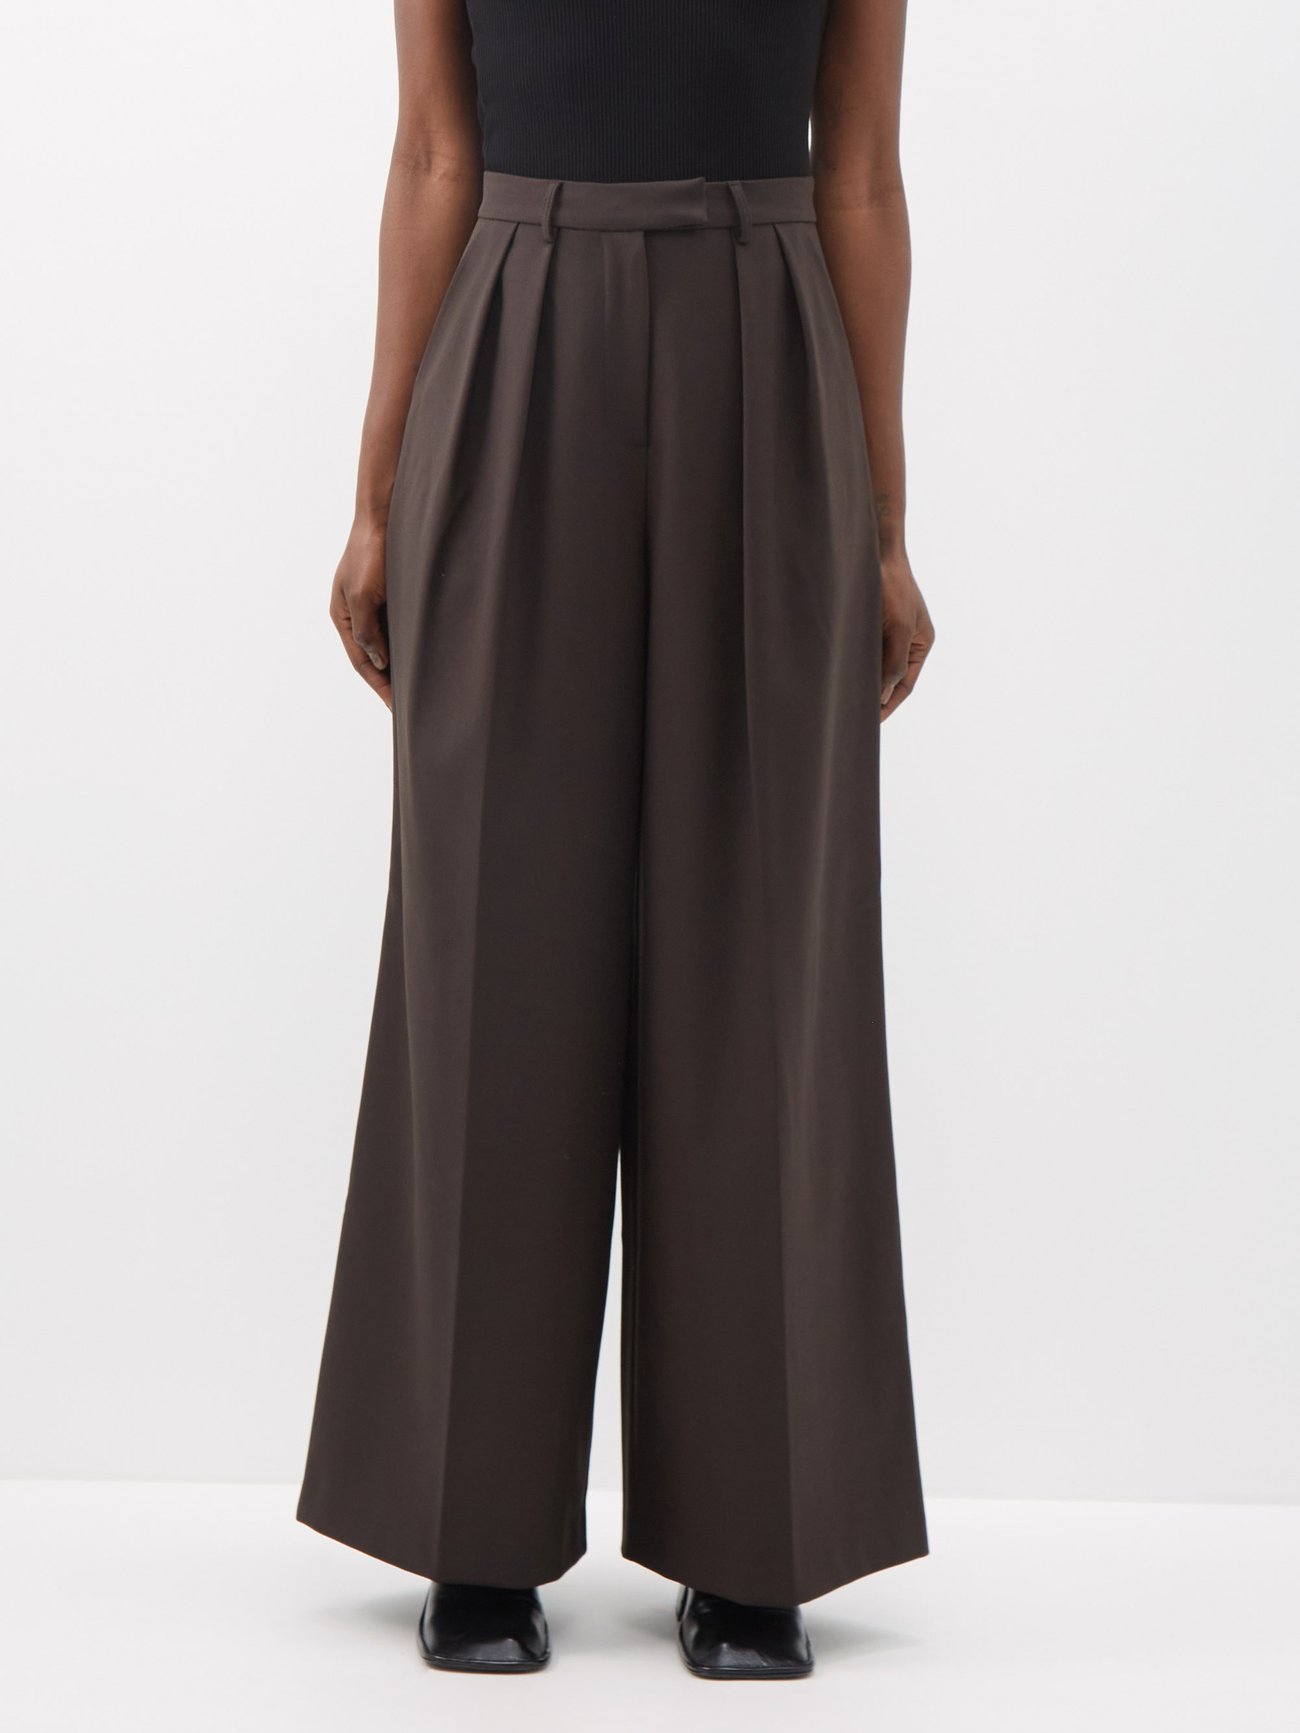 THE FRANKIE SHOP
Varda wool-blend wide-leg tailored trousers